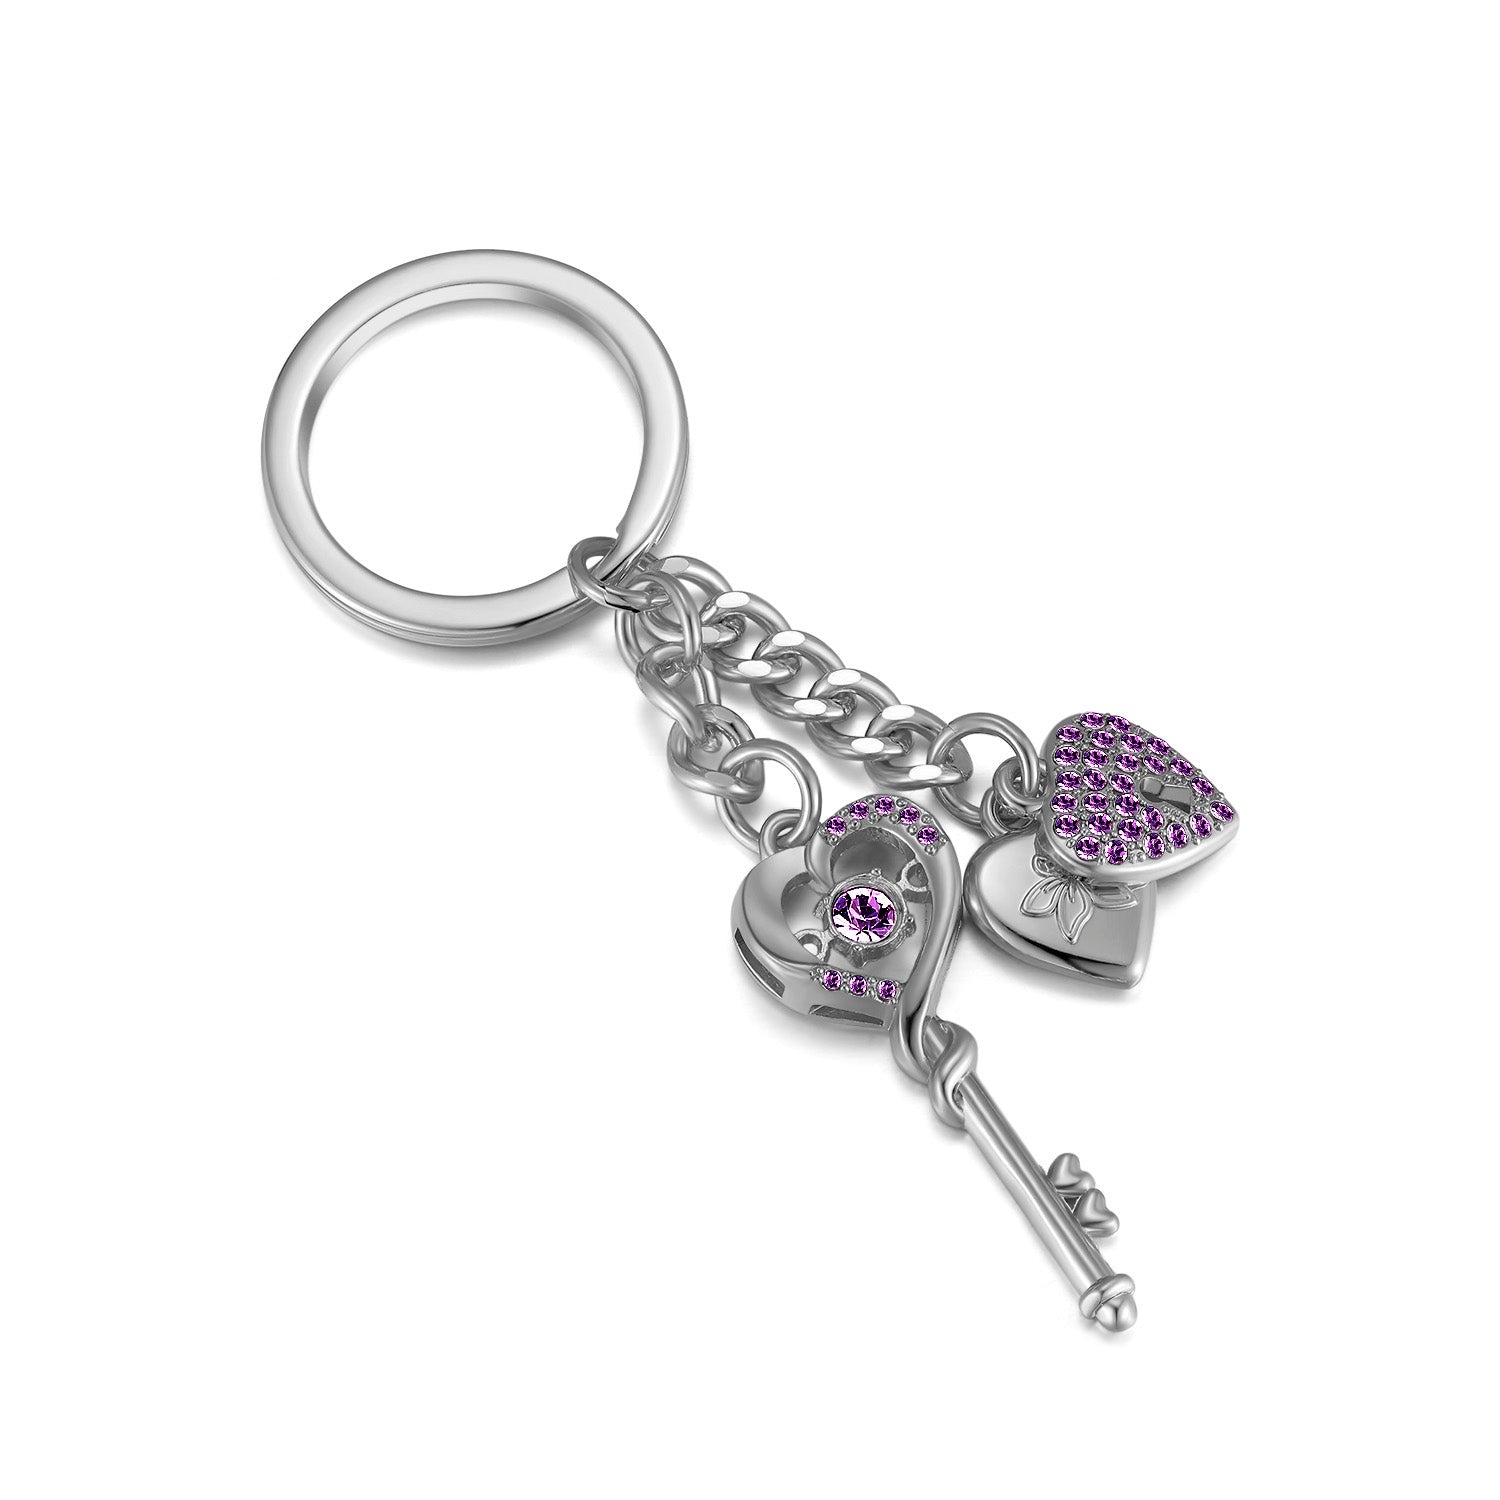 Vicacci Silver Color Heart shape keychain with brilliant purple crystals